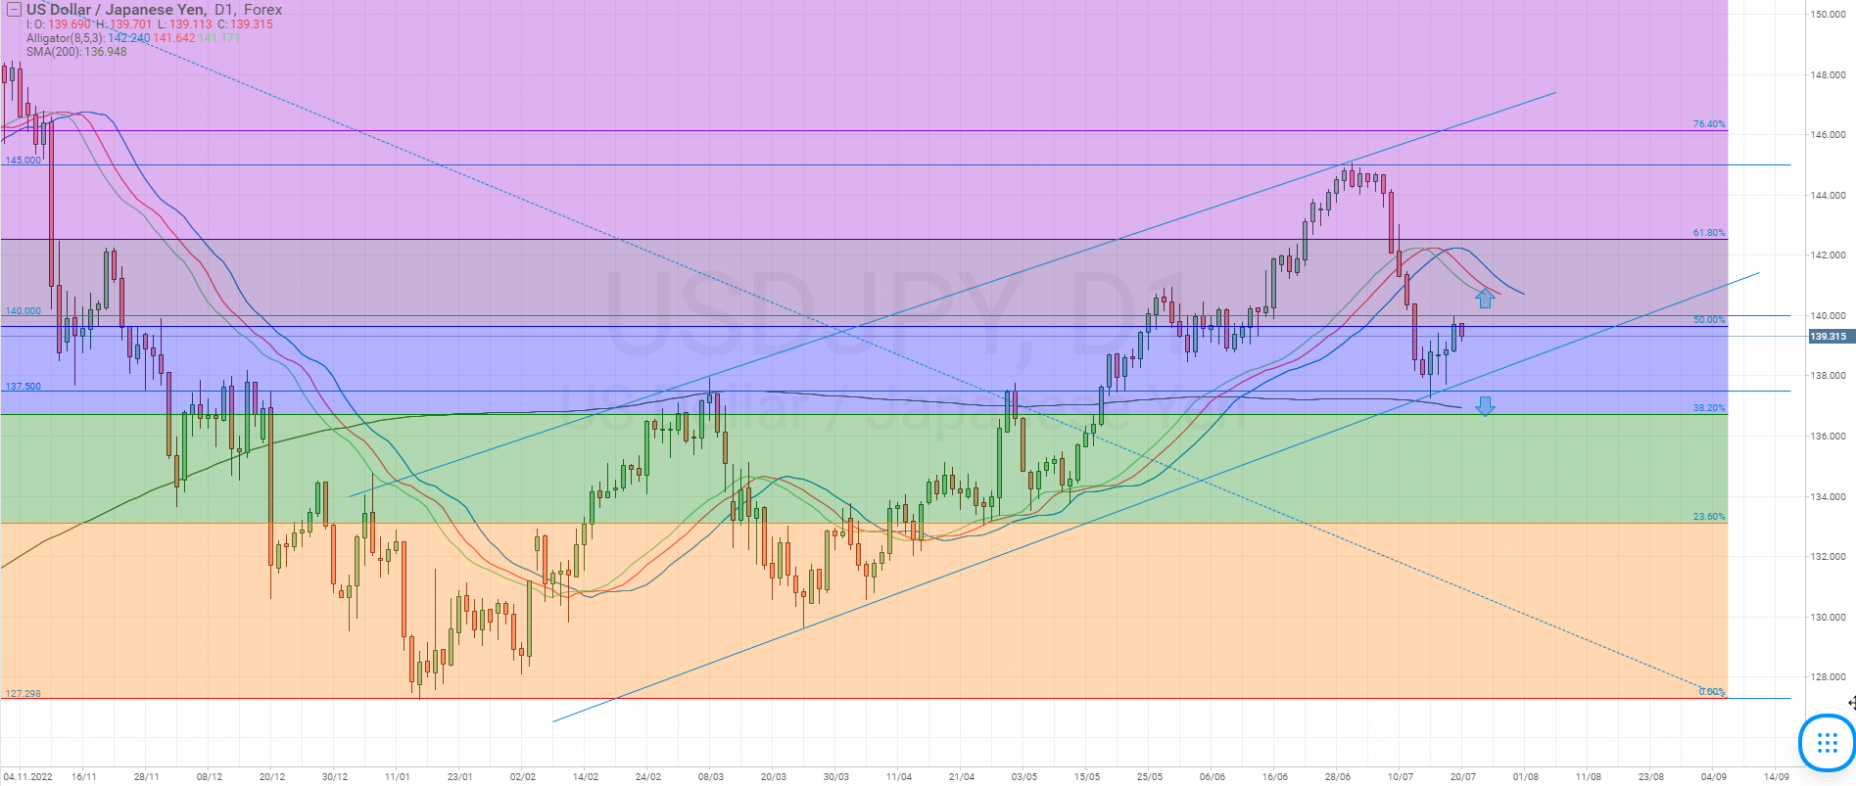 Technical analysis of the USD/JPY currency pair